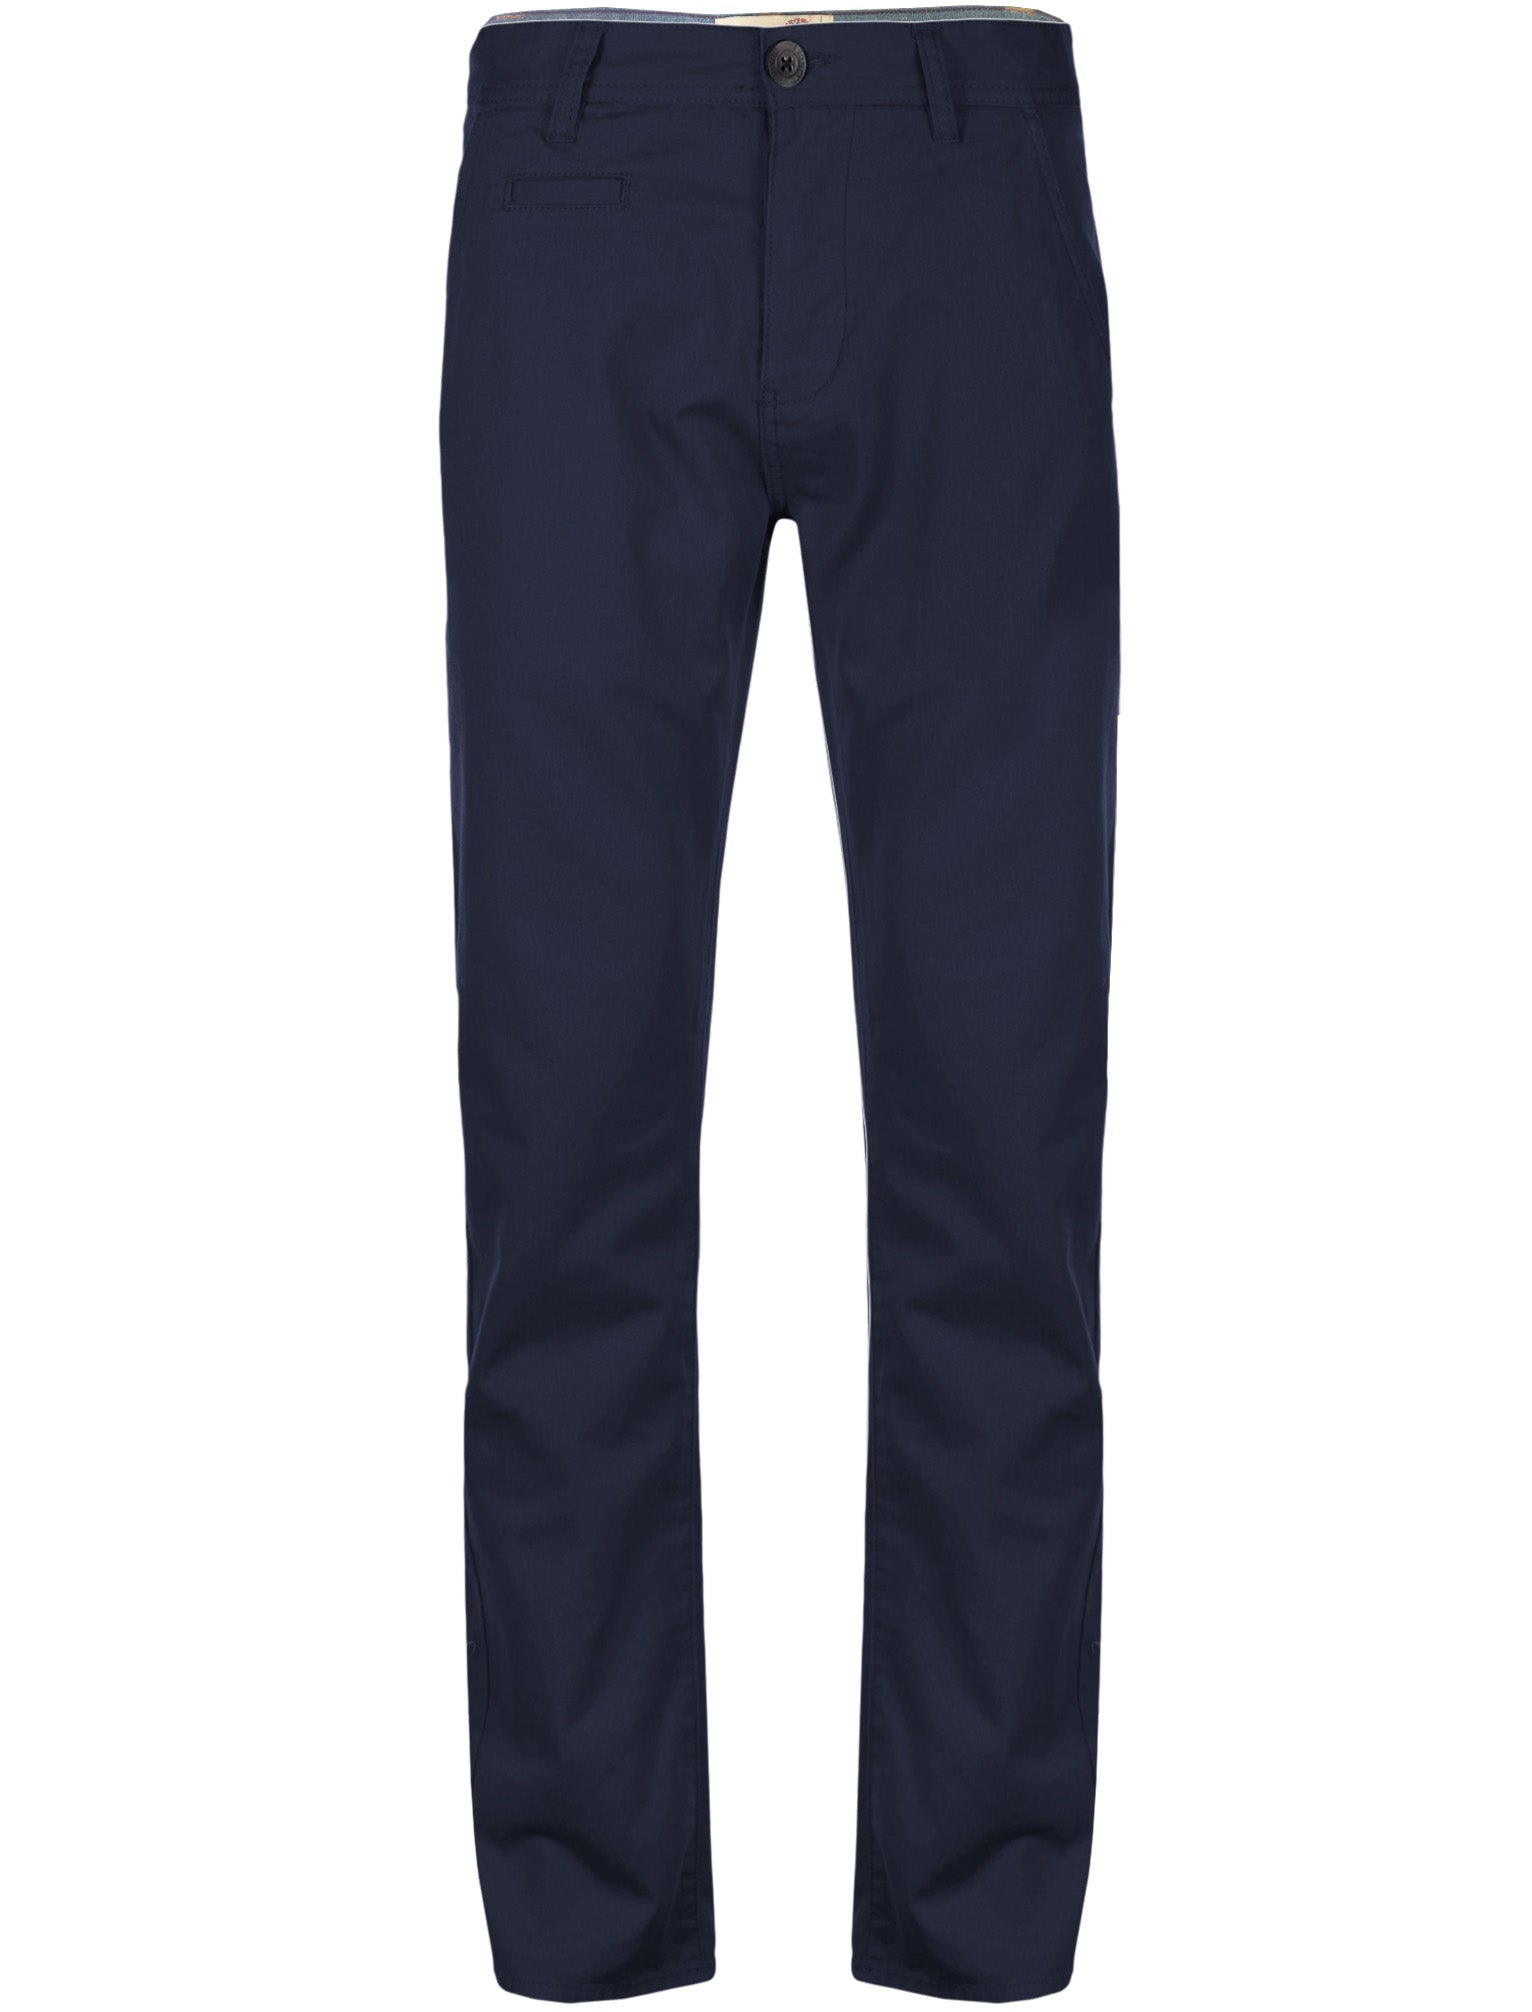 Trousers Flynn Cotton Twill Chino Trousers in True Navy - Tokyo Laundry / 28S - Tokyo Laundry